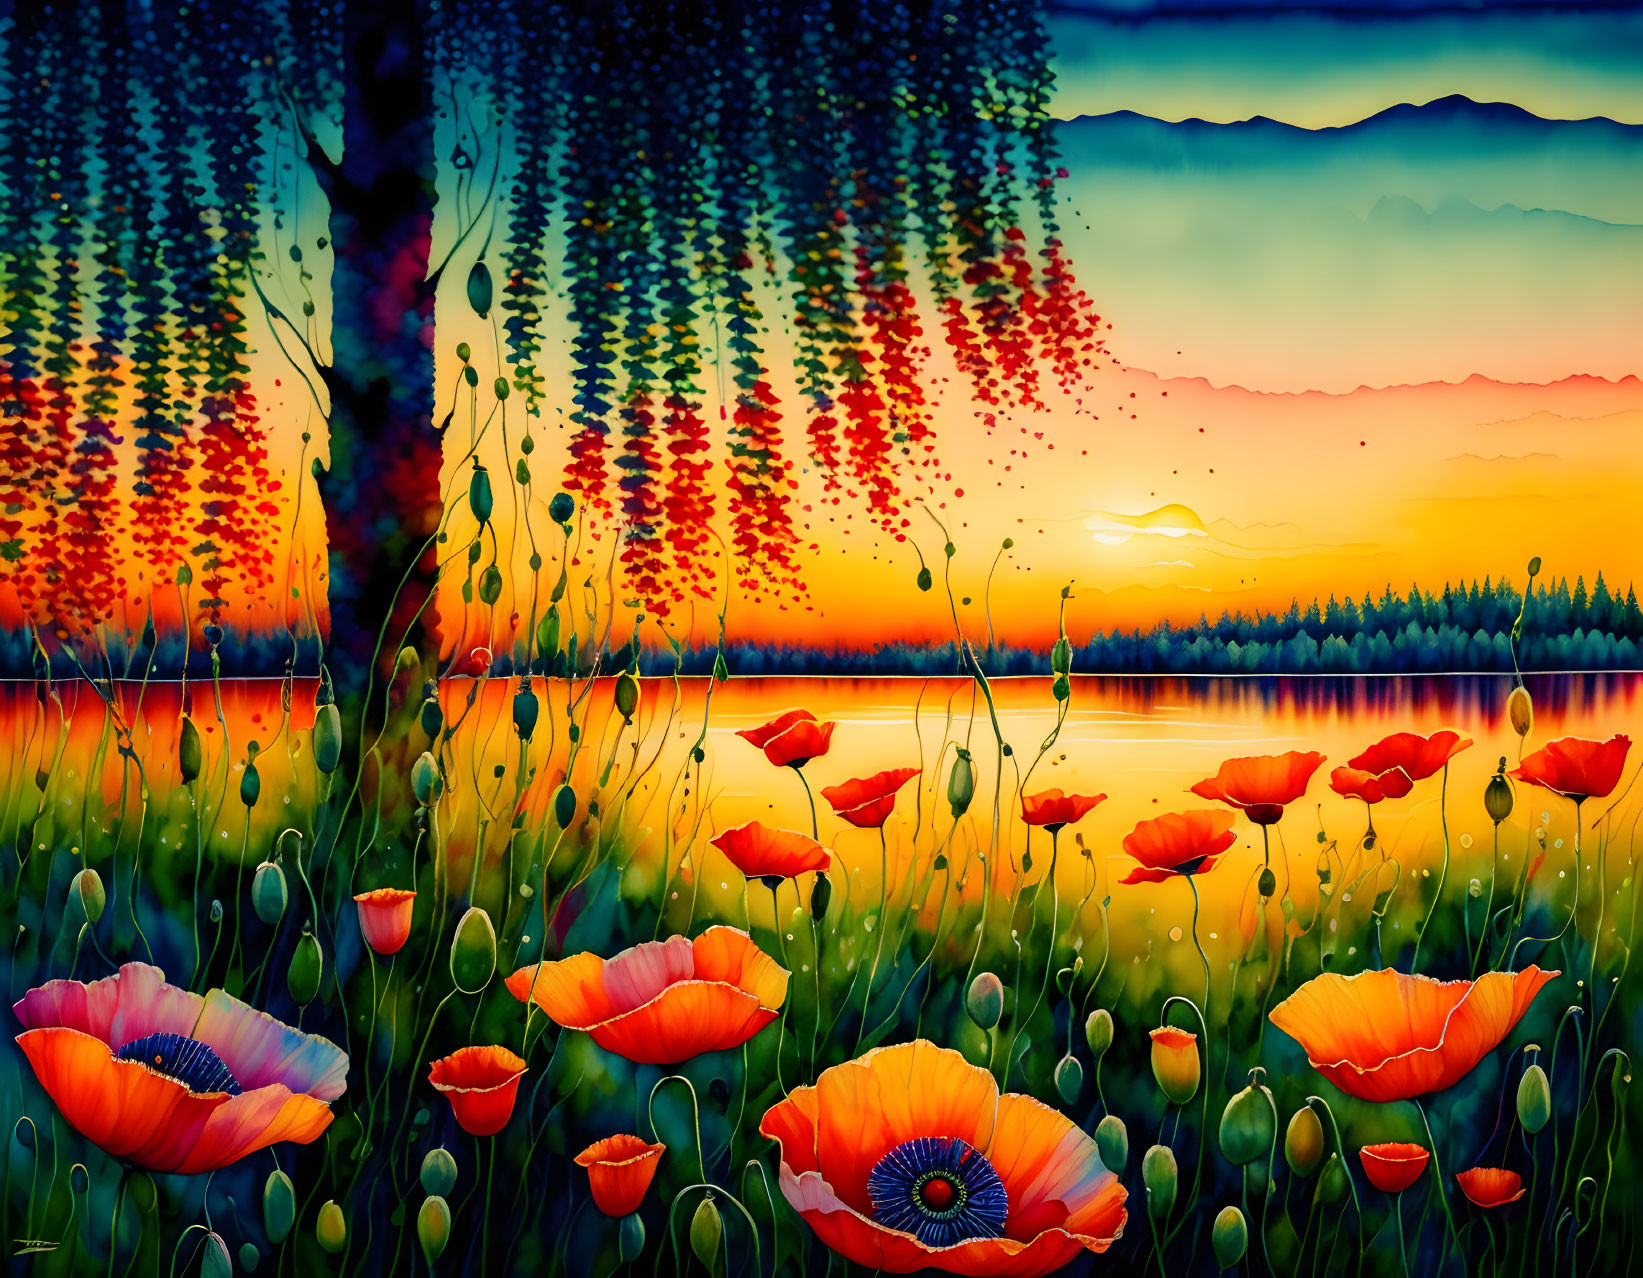 Colorful sunset over serene lake with tree silhouettes, red poppies, and green foliage